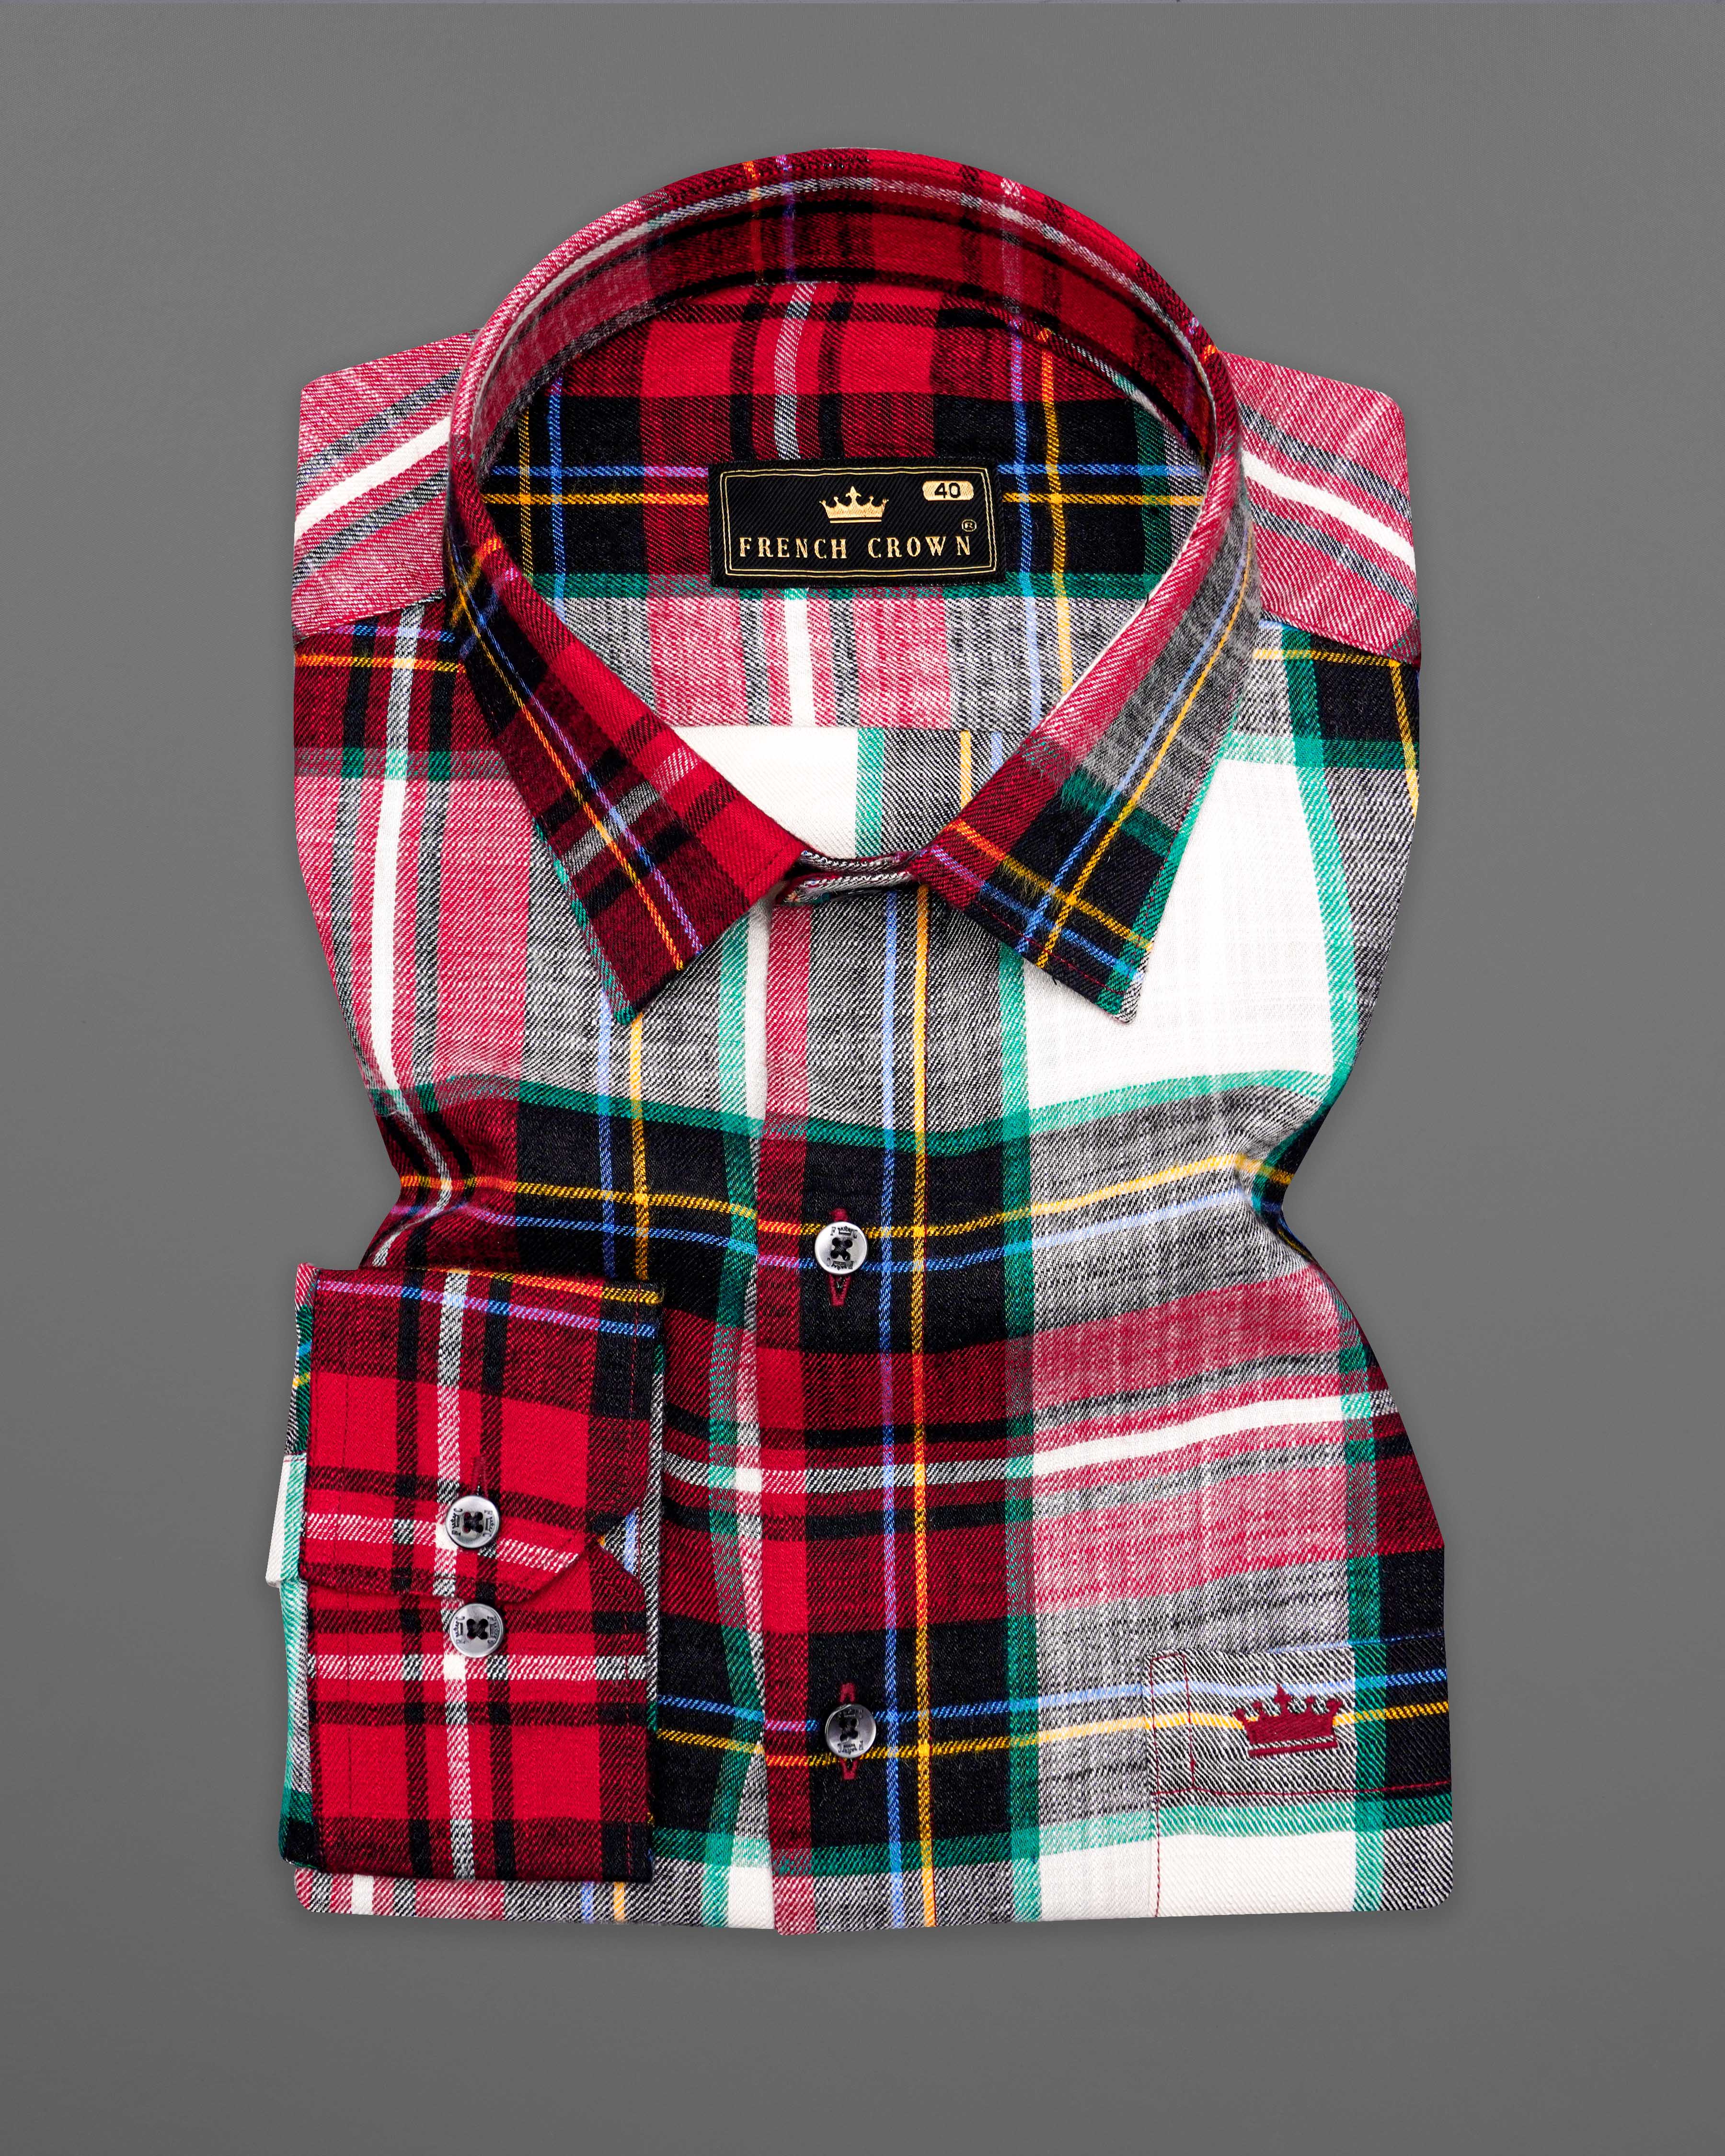 Firebrick Red With Jade Black and White Plaid Flannel Shirt 8538-BLK-38,8538-BLK-H-38,8538-BLK-39,8538-BLK-H-39,8538-BLK-40,8538-BLK-H-40,8538-BLK-42,8538-BLK-H-42,8538-BLK-44,8538-BLK-H-44,8538-BLK-46,8538-BLK-H-46,8538-BLK-48,8538-BLK-H-48,8538-BLK-50,8538-BLK-H-50,8538-BLK-52,8538-BLK-H-52